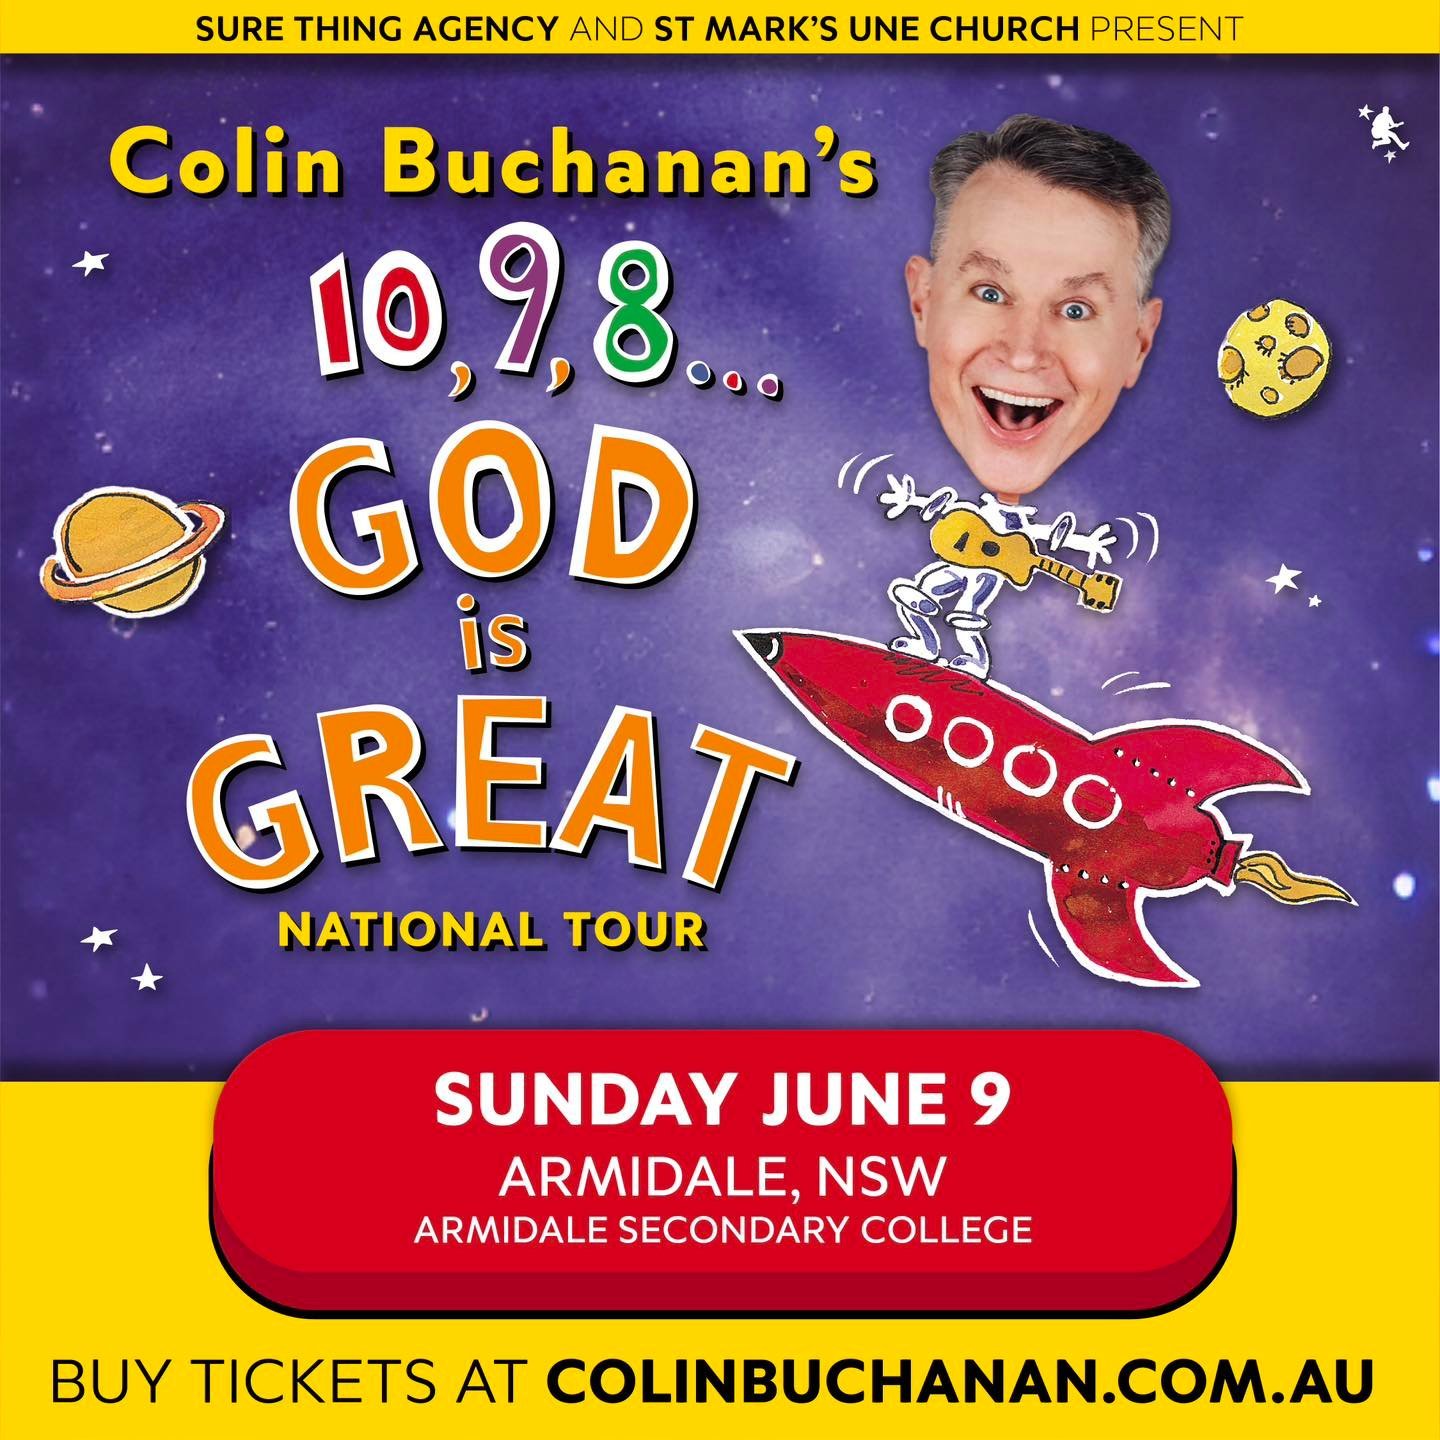 St Mark&rsquo;s UNEchurch &amp; Sure Thing Agency present Colin Buchanan&rsquo;s 10,9,8&hellip; God is Great National Tour! 

Colin is coming to Armidale, so everybody get ready for BLAST OFF!!

The 10,9,8&hellip; God is Great Tour features a bunch o